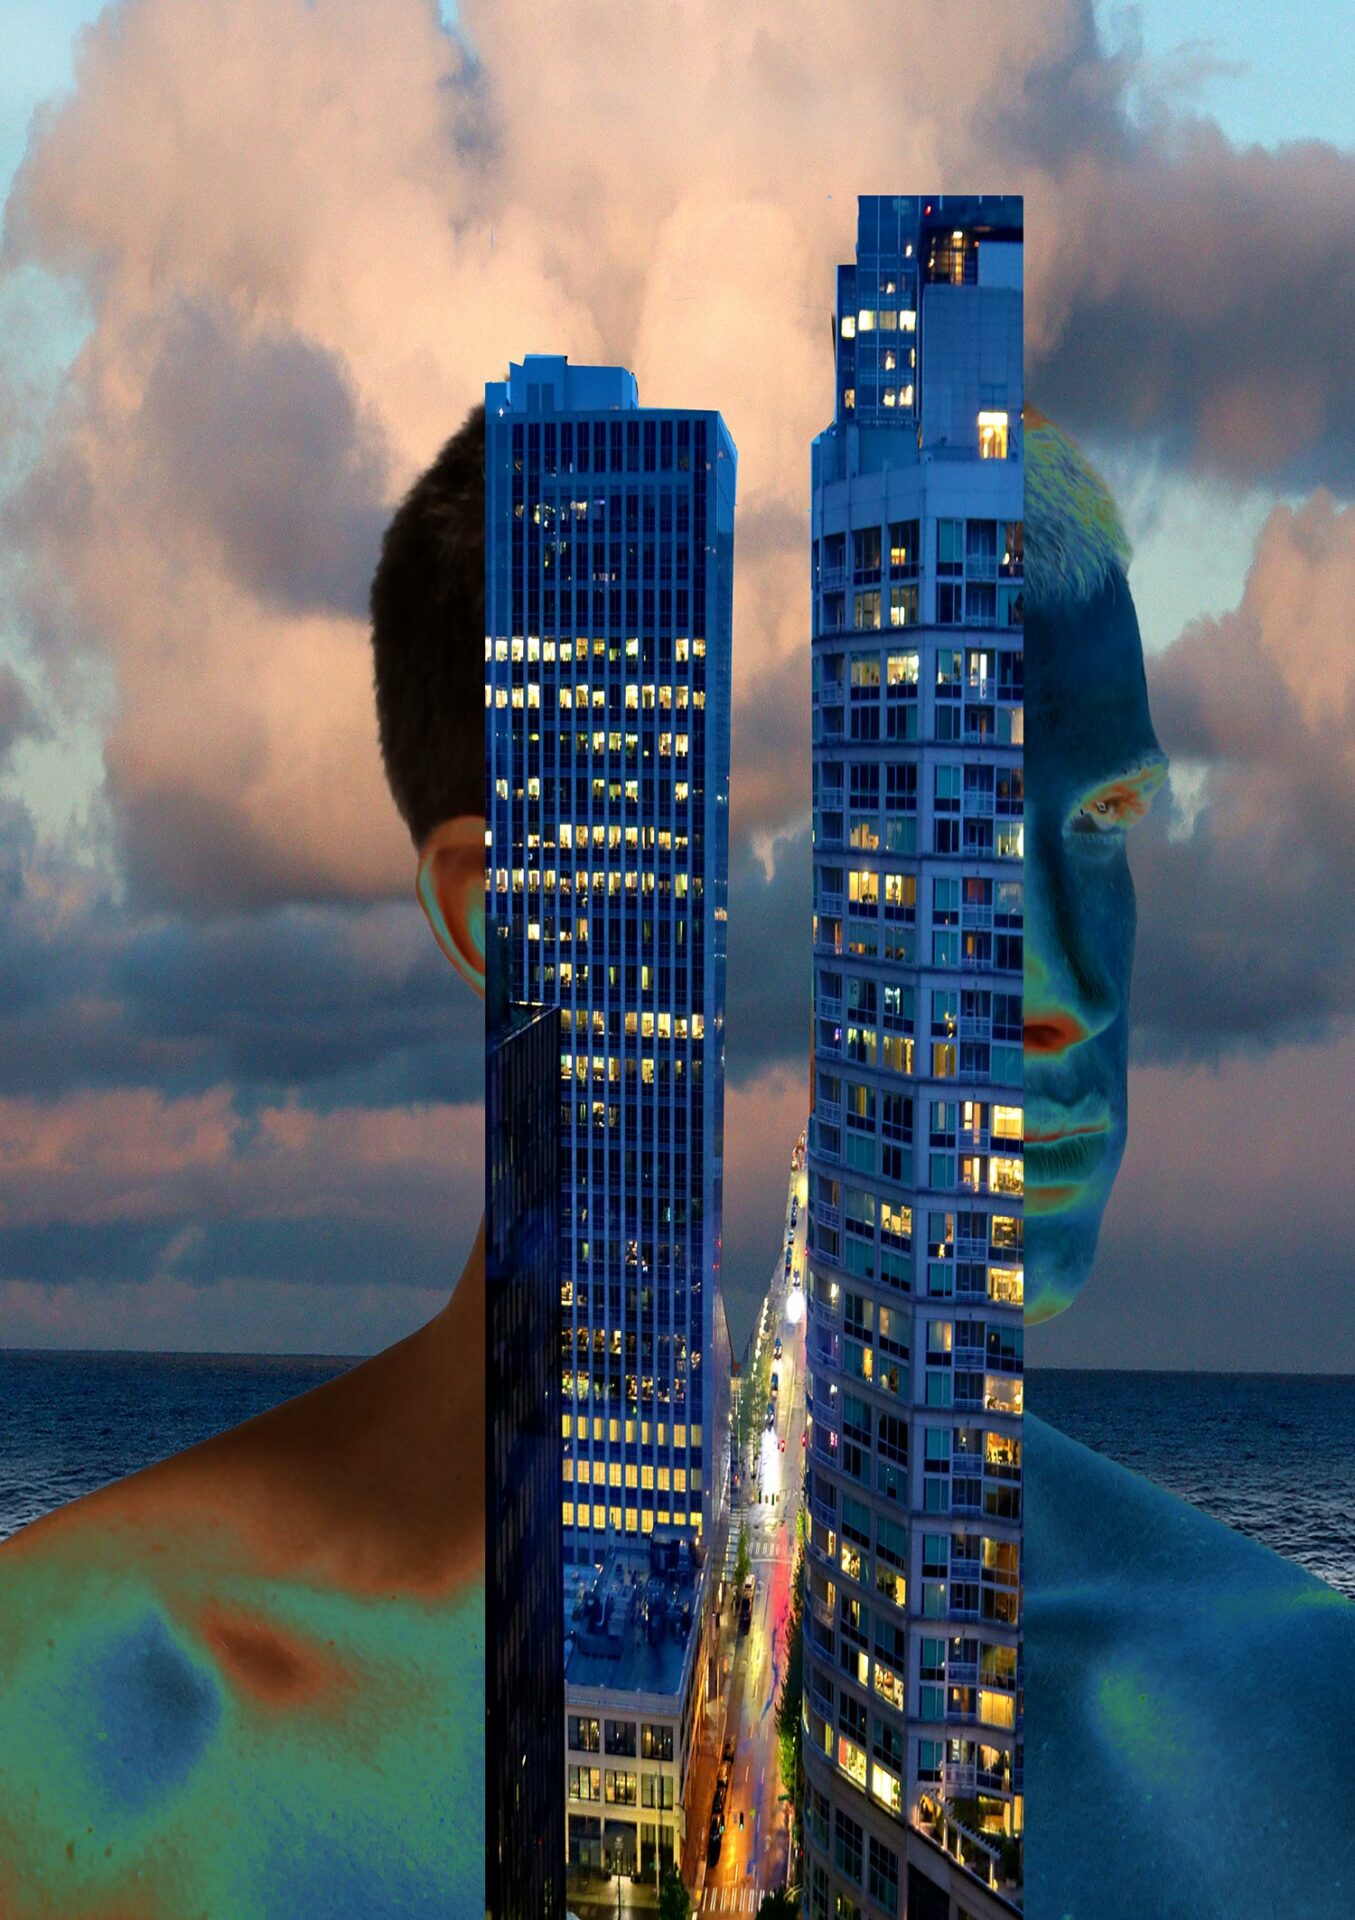 A photo of a man in front of a skyscraper.